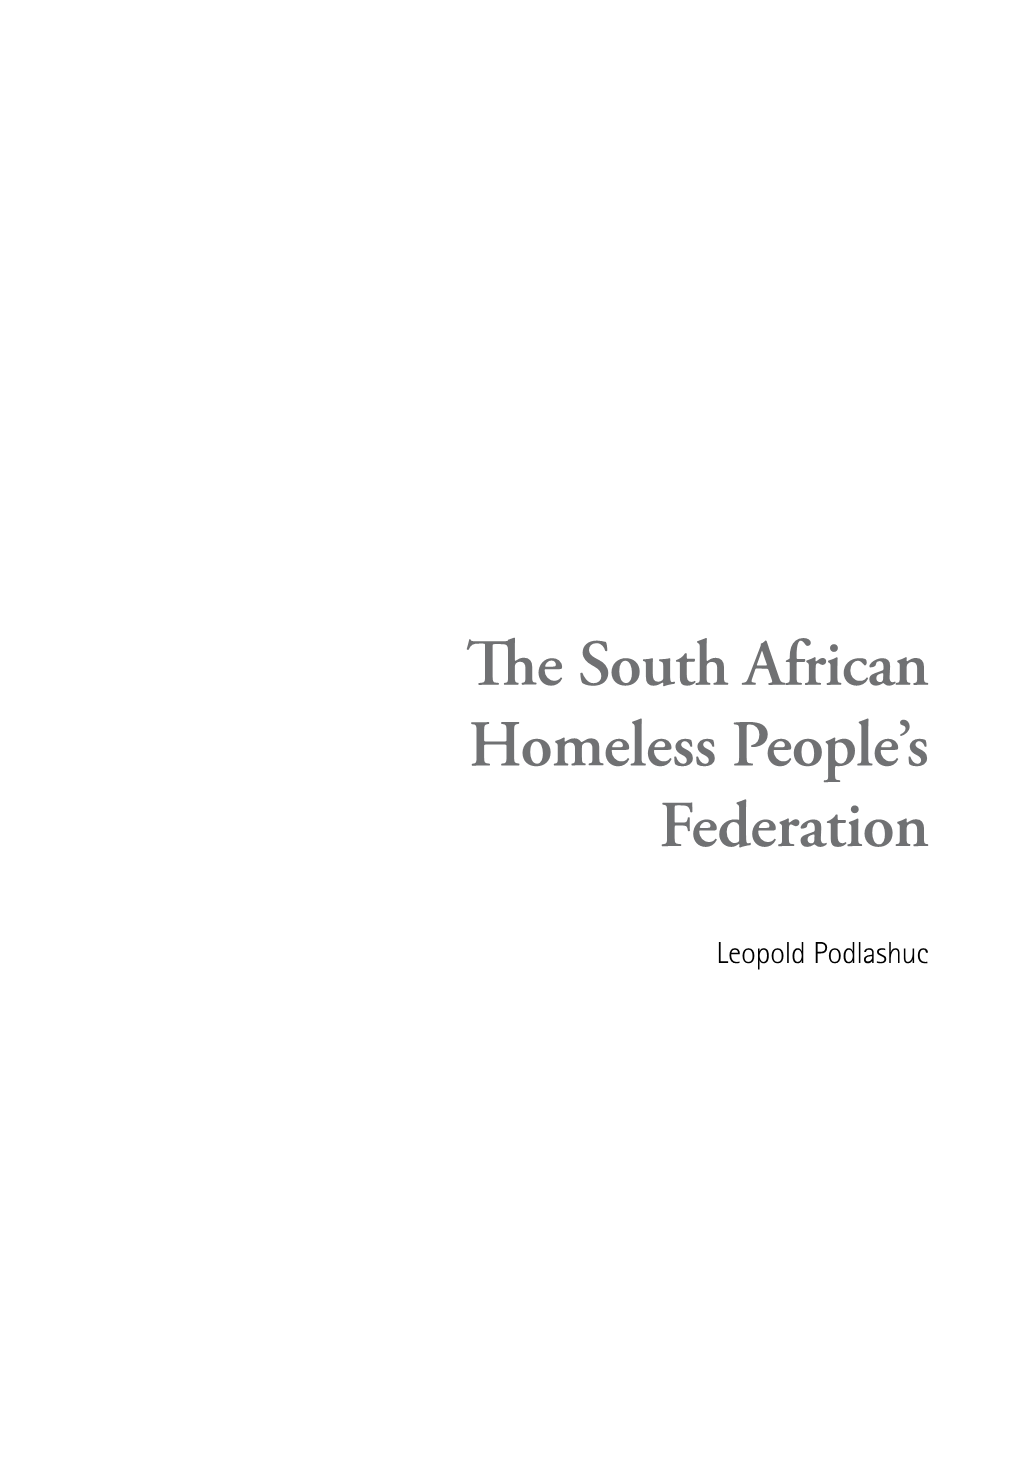 The South African Homeless People's Federation